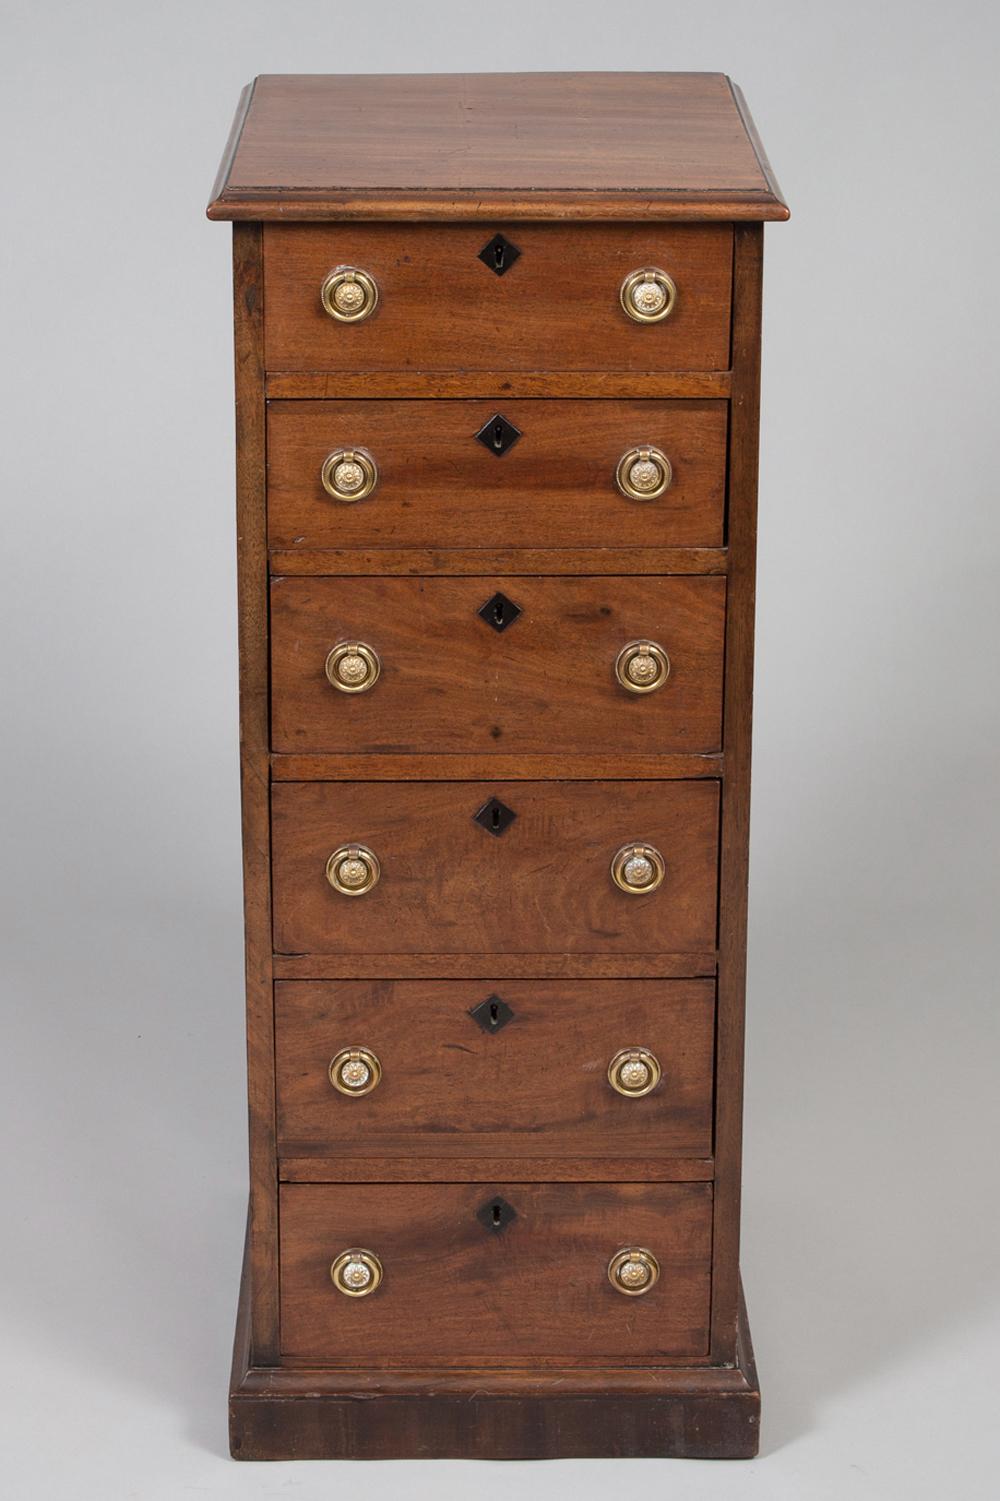 Late George III mahogany tall slender chest with six drawers, the rectangular top with molded edge, brass ring handles, diamond-shaped ebonized eschuteons, supported on a plinth base.